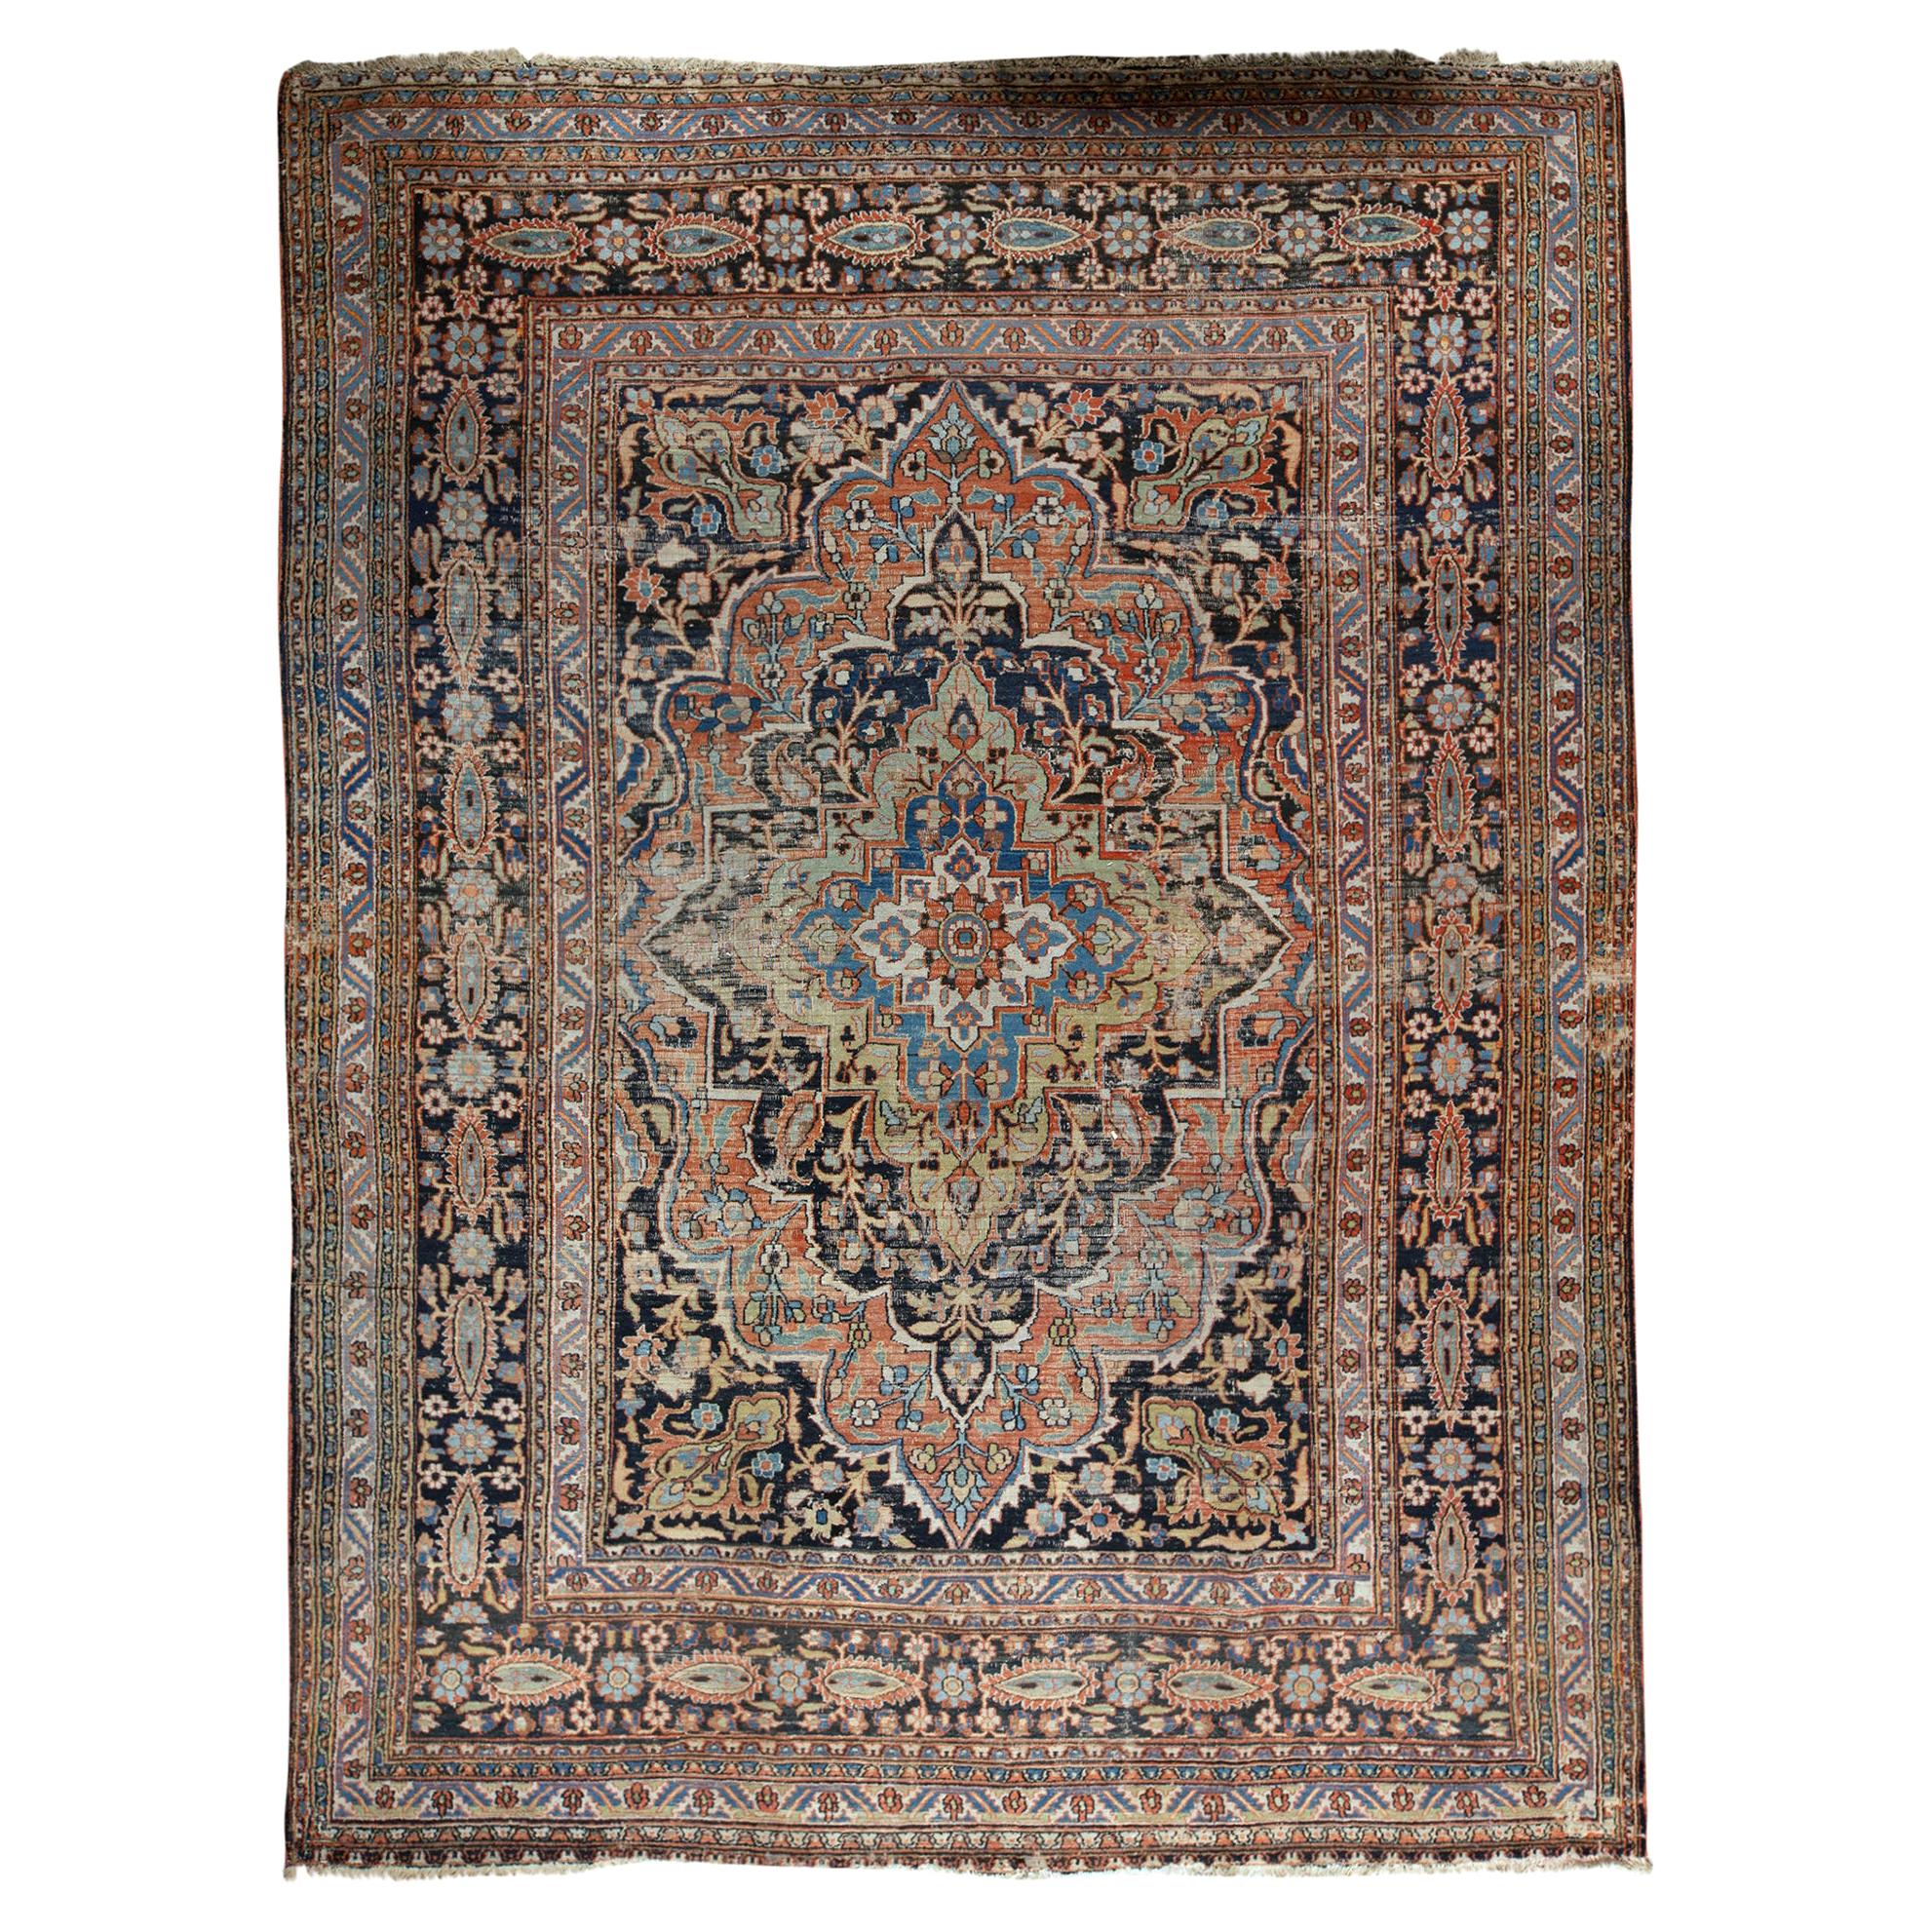  Antique Persian fine Traditional Handwoven Luxury Wool Navy Rug